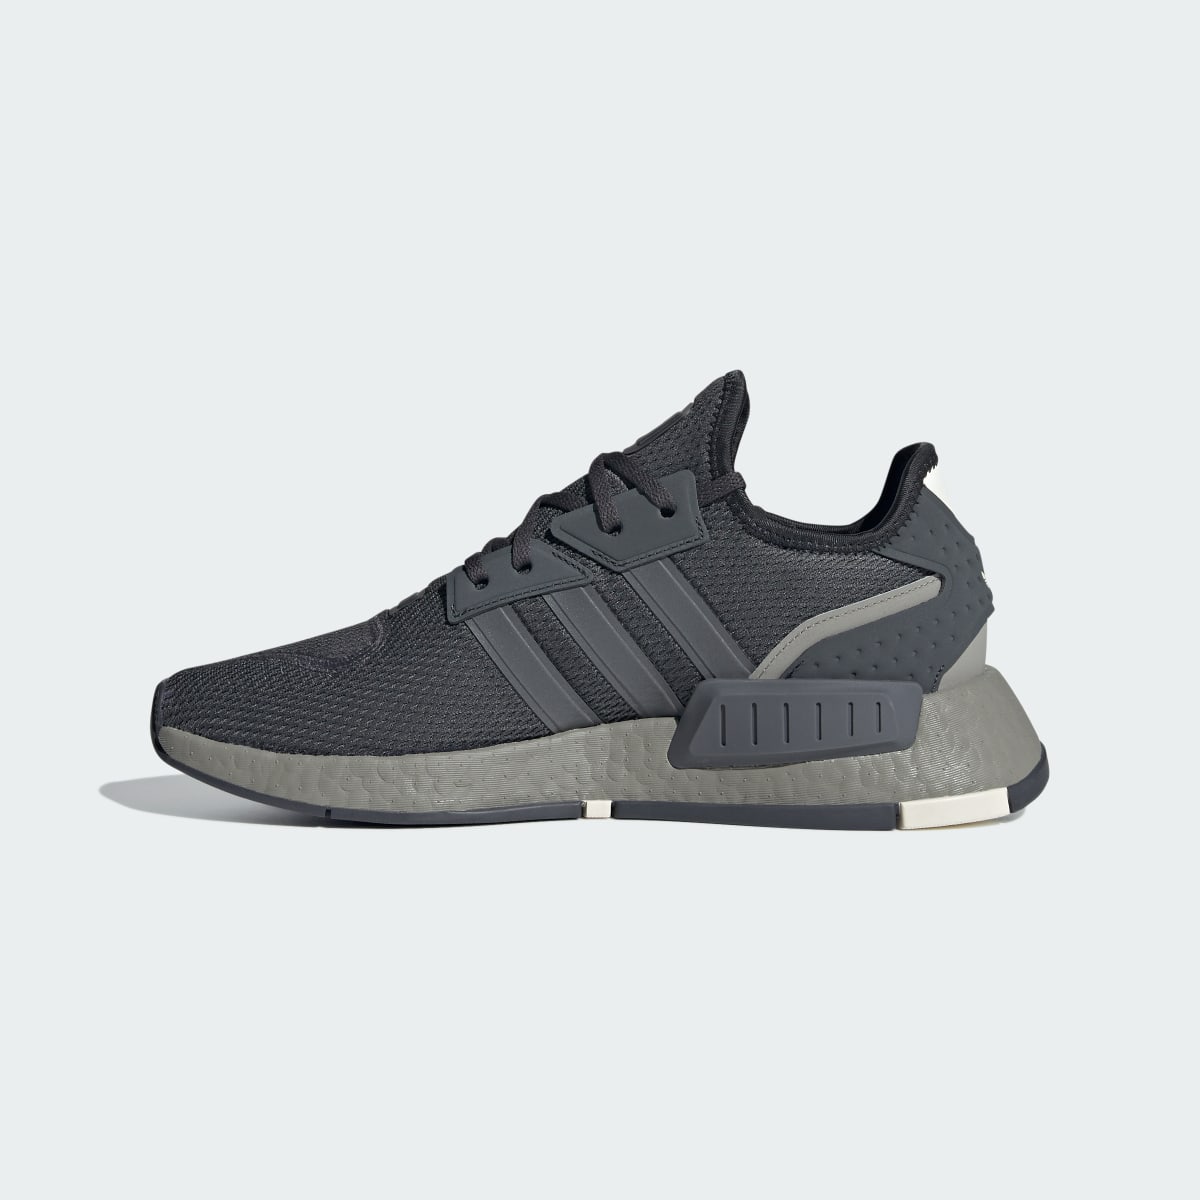 Adidas NMD_G1 Shoes. 9